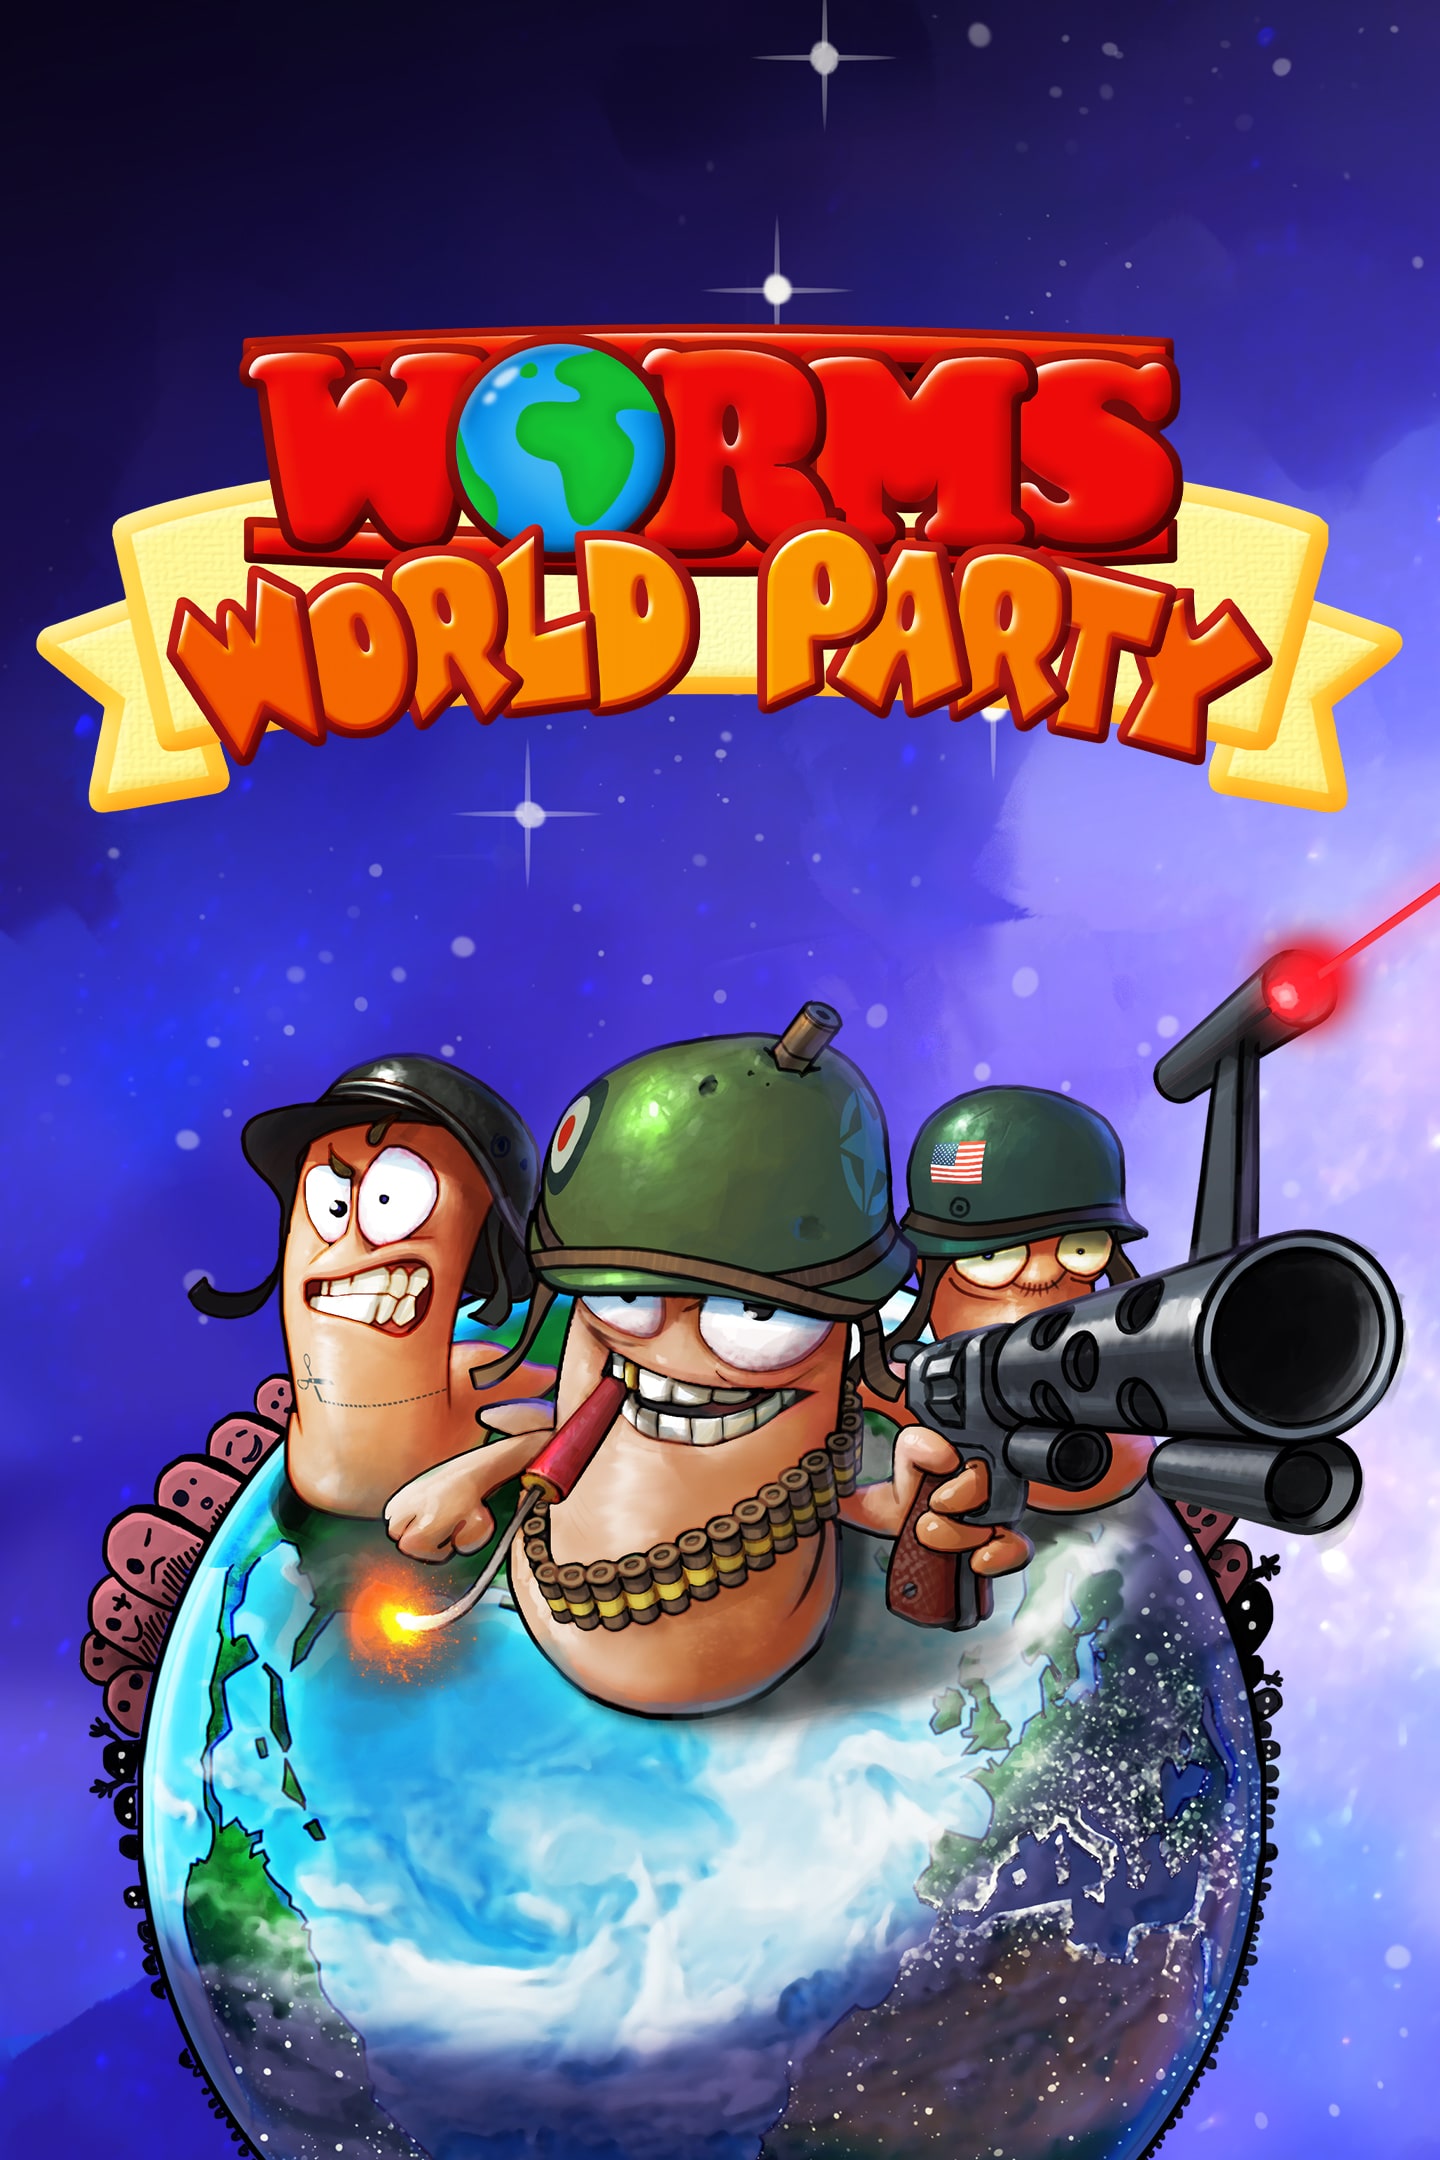 Worms ps4